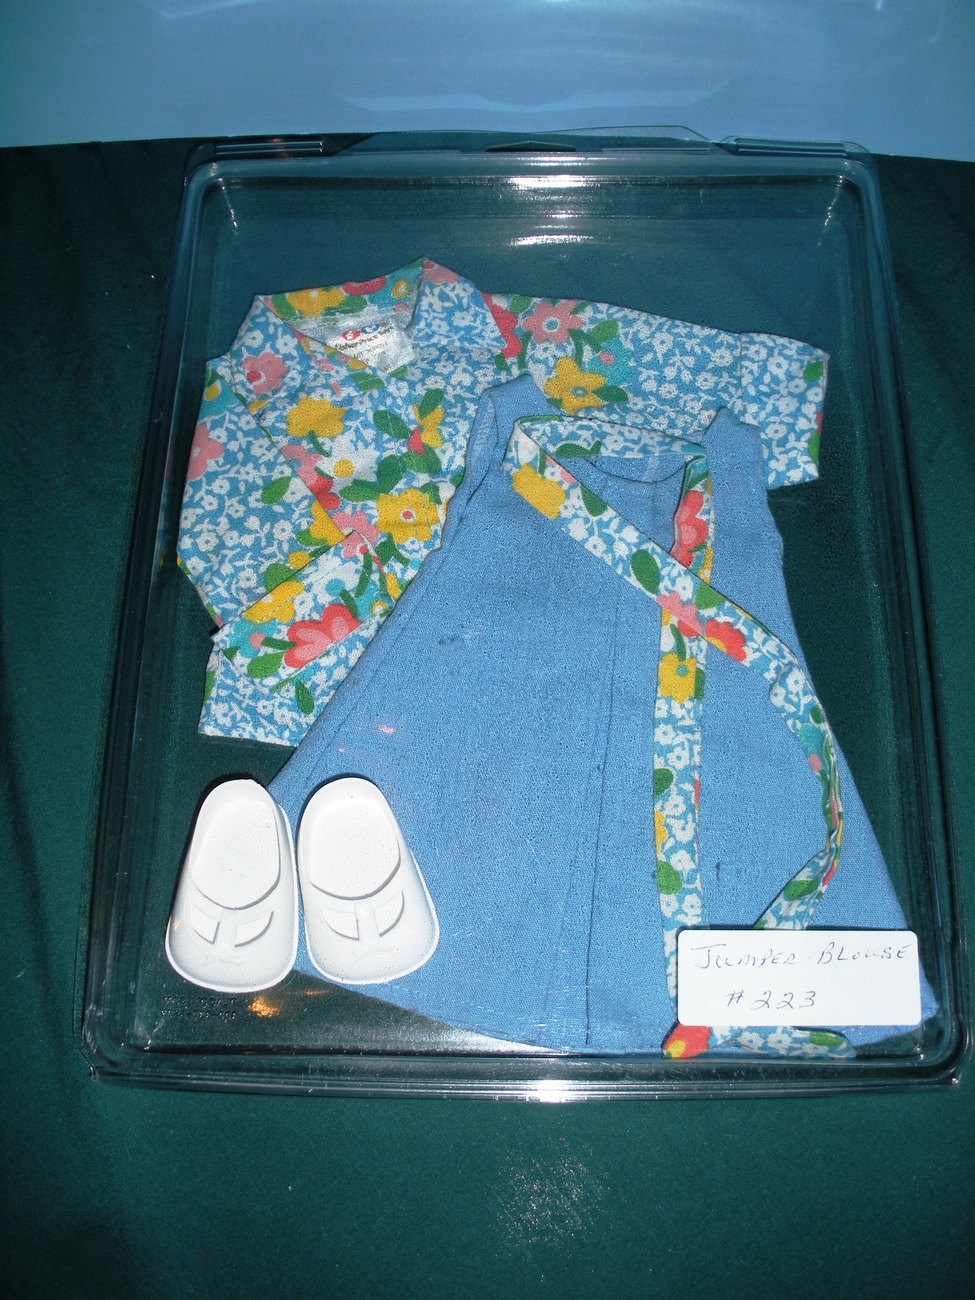 Vtg. Fisher Price My Friend #223 Jumper and Blouse Outfit COMP/NR MINT + SHOES - $22.99